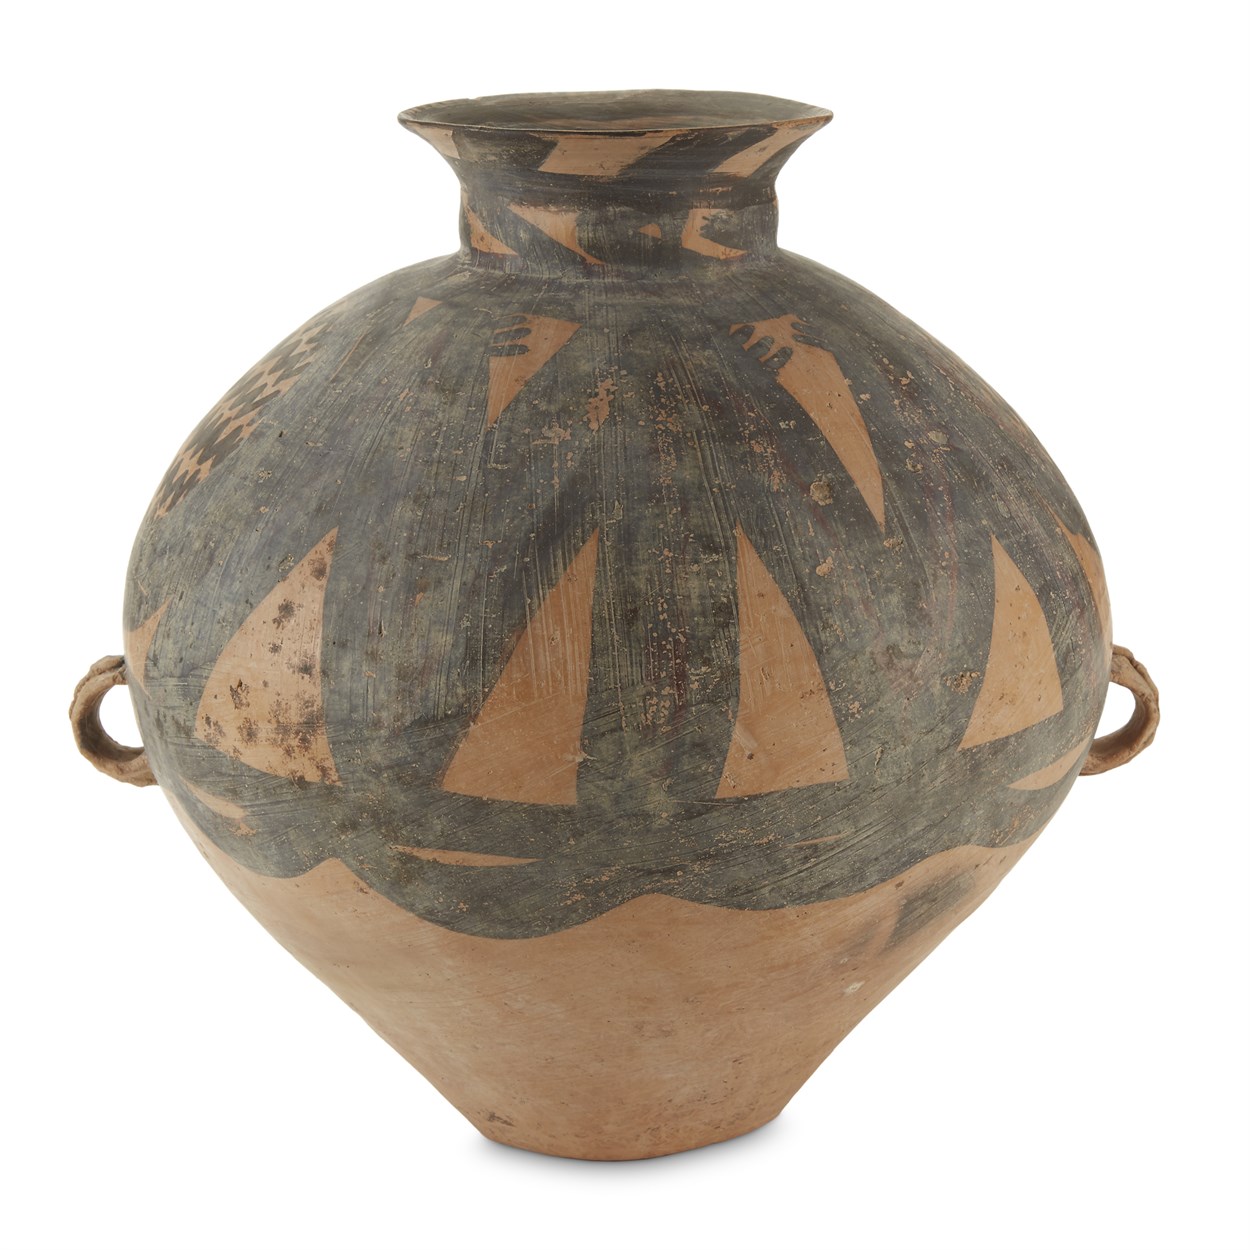 Lot 2 - A Chinese Neolithic painted pottery jar, Banshan culture